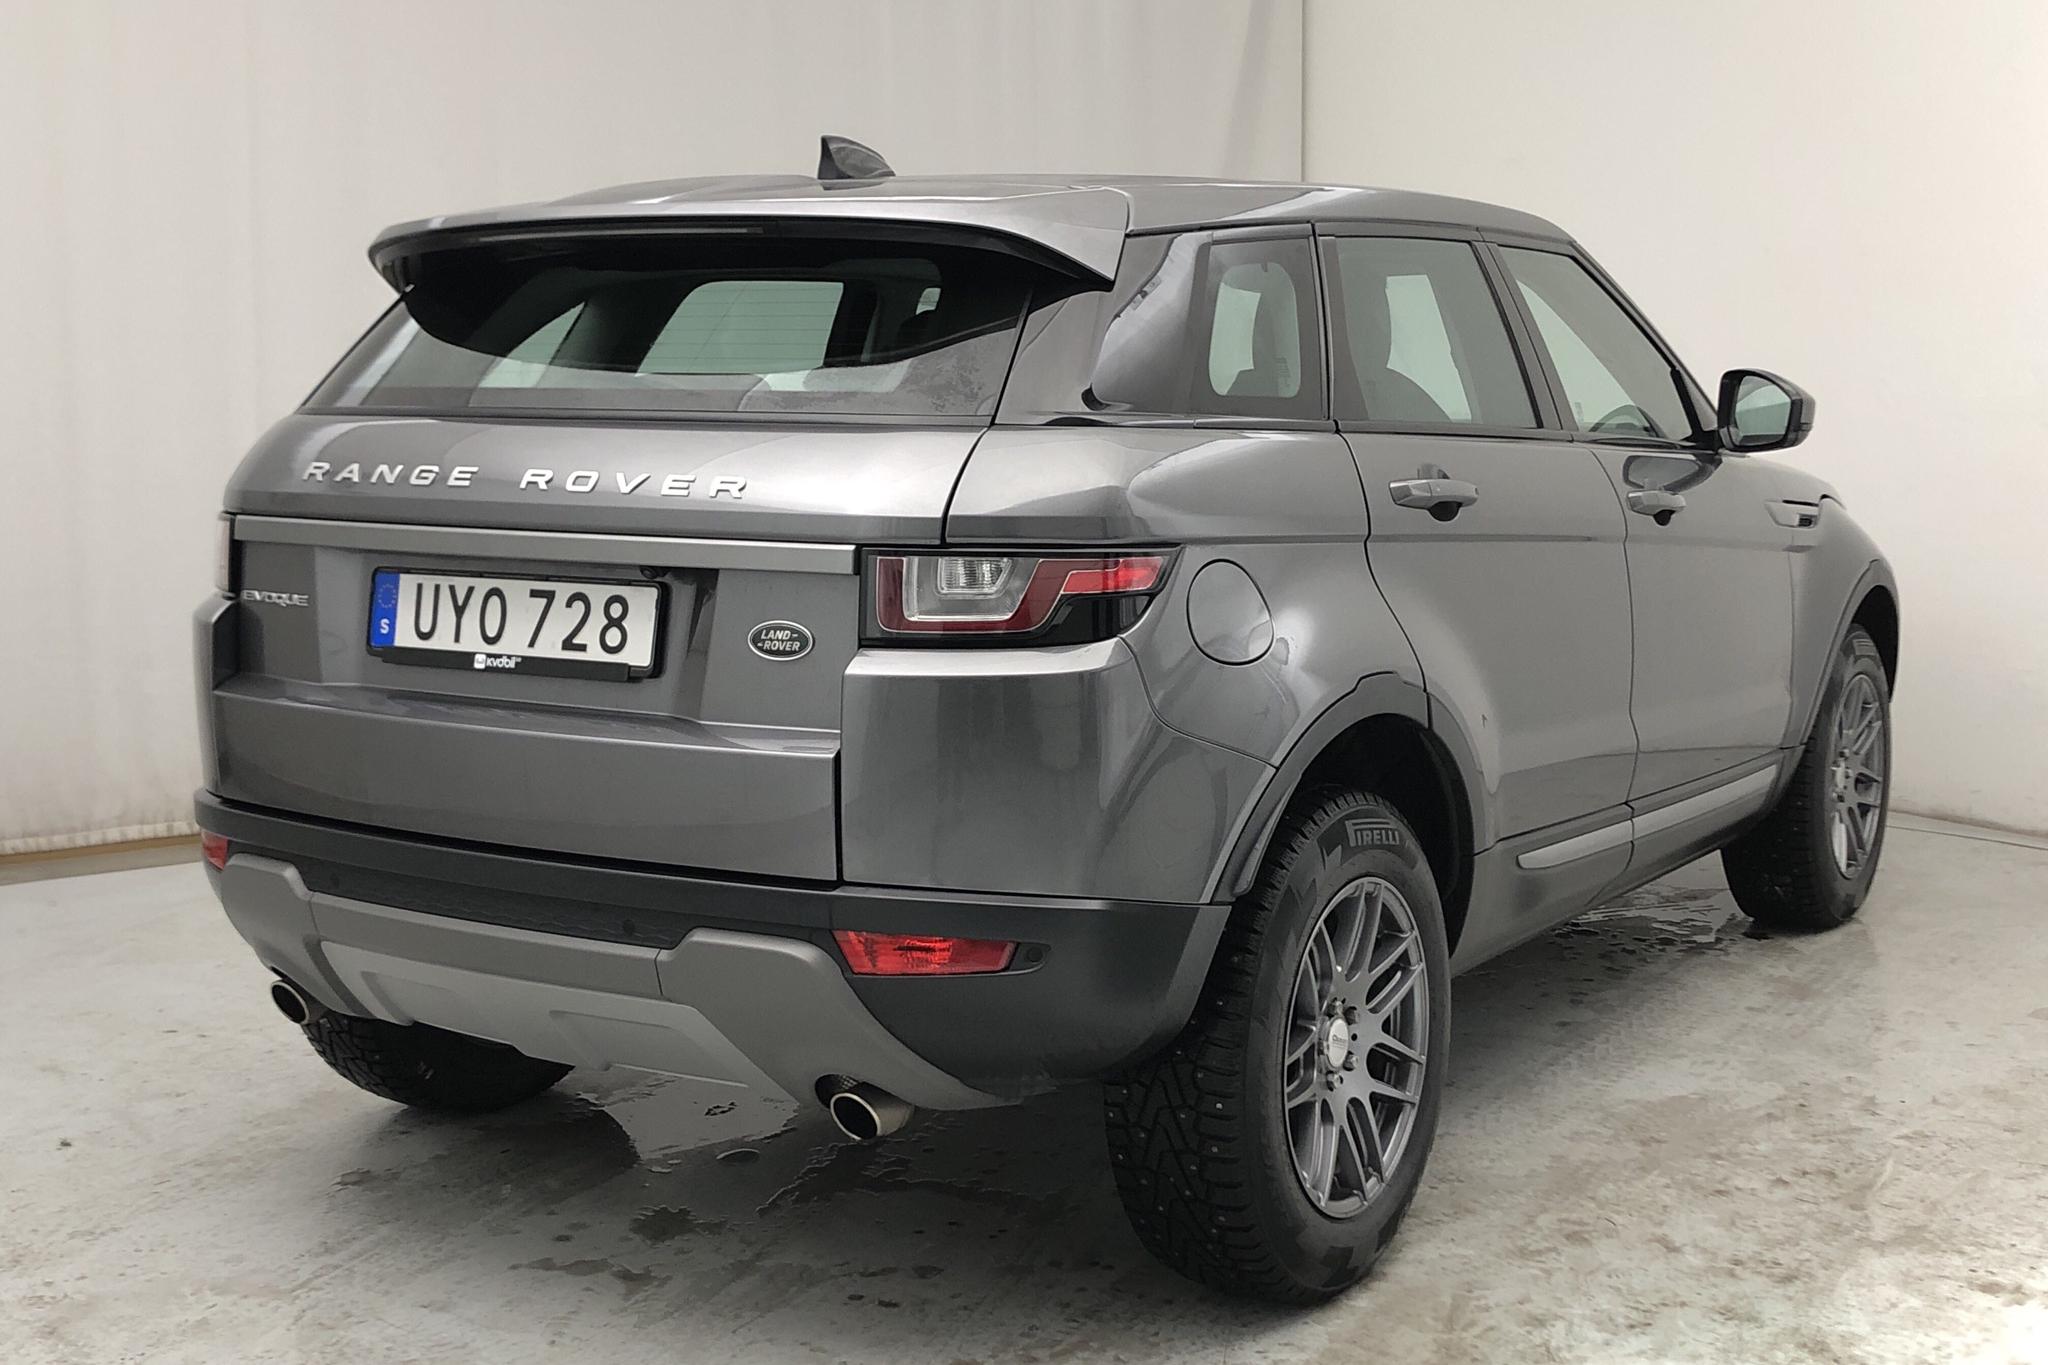 Land Rover Range Rover Evoque 2.0 TD4 AWD 5dr (150hk) - 11 950 km - Automatic - gray - 2017